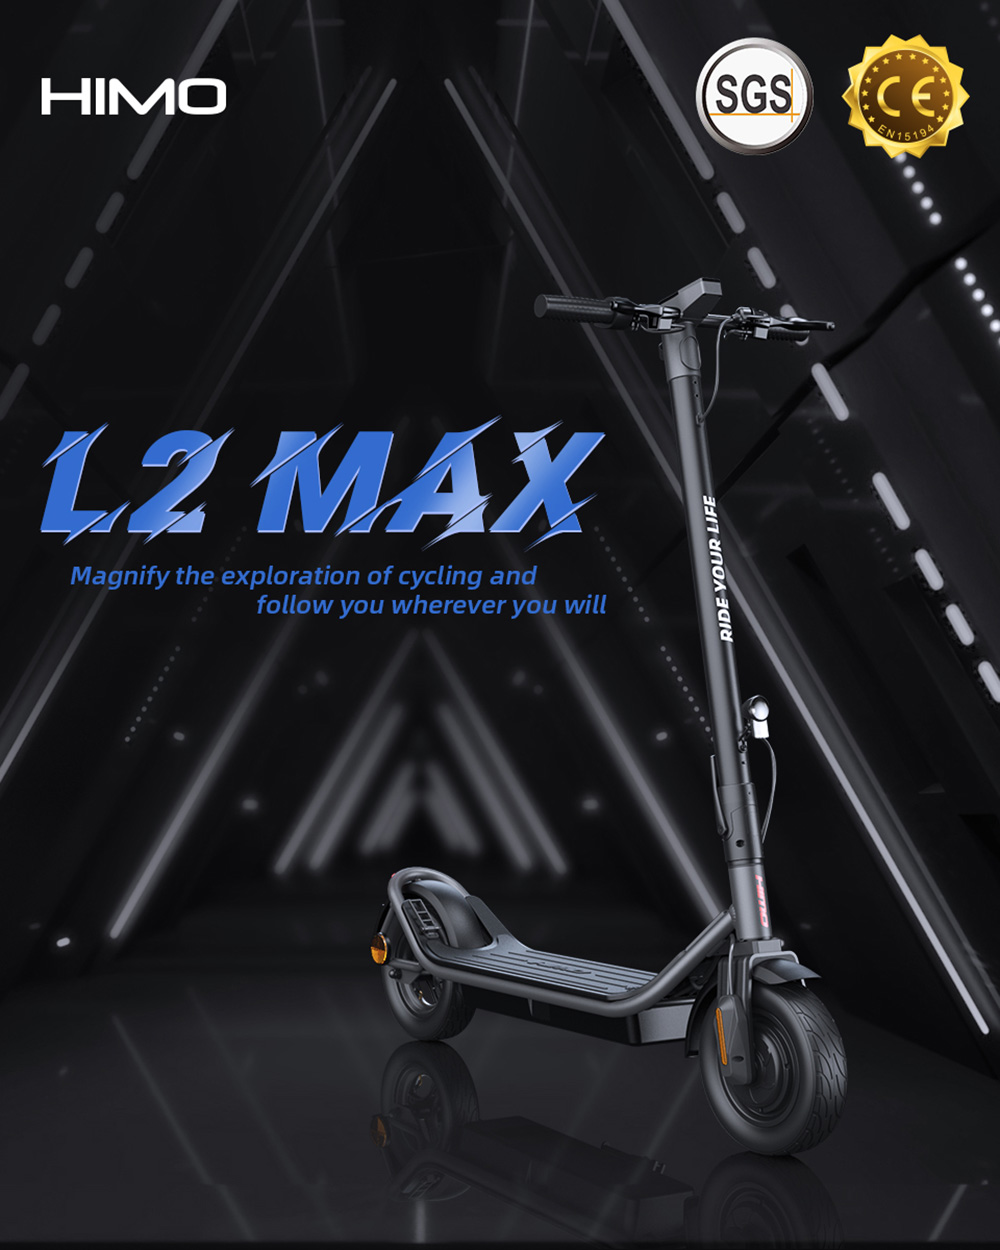 HIMO L2 MAX Folding Electric Scooter 10 Inch Tires 350W Brushless Motor 36V 10.4Ah Battery 25KM/H Speed 100KG Max Load Double Brakes - Gray